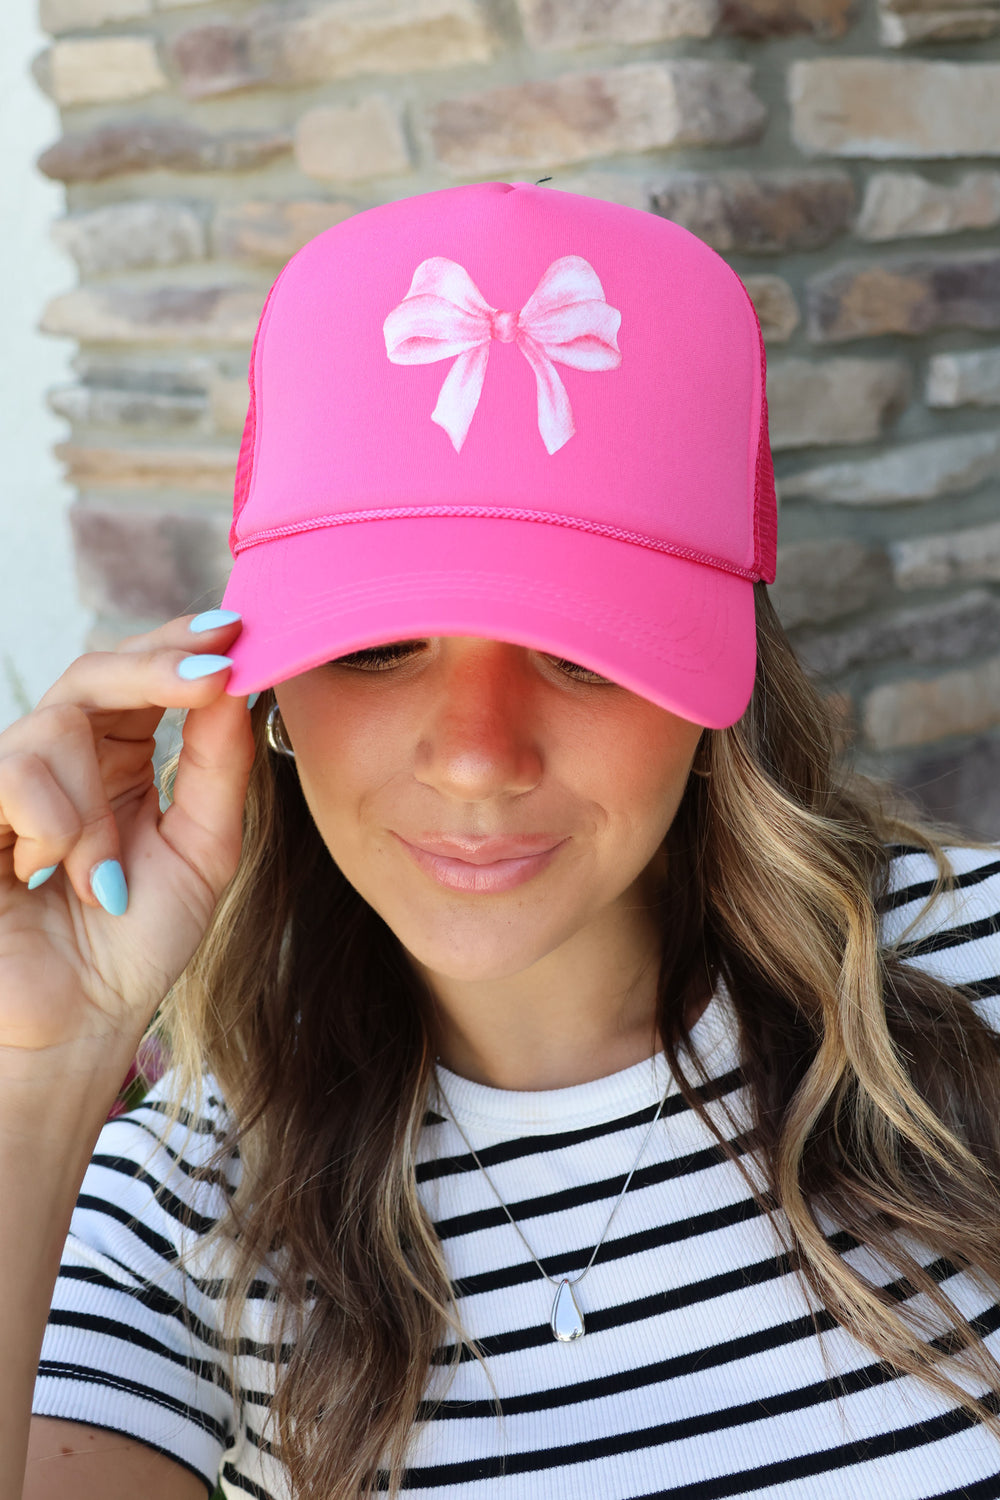 It All About Bows Trucker Hat - ShopSpoiled